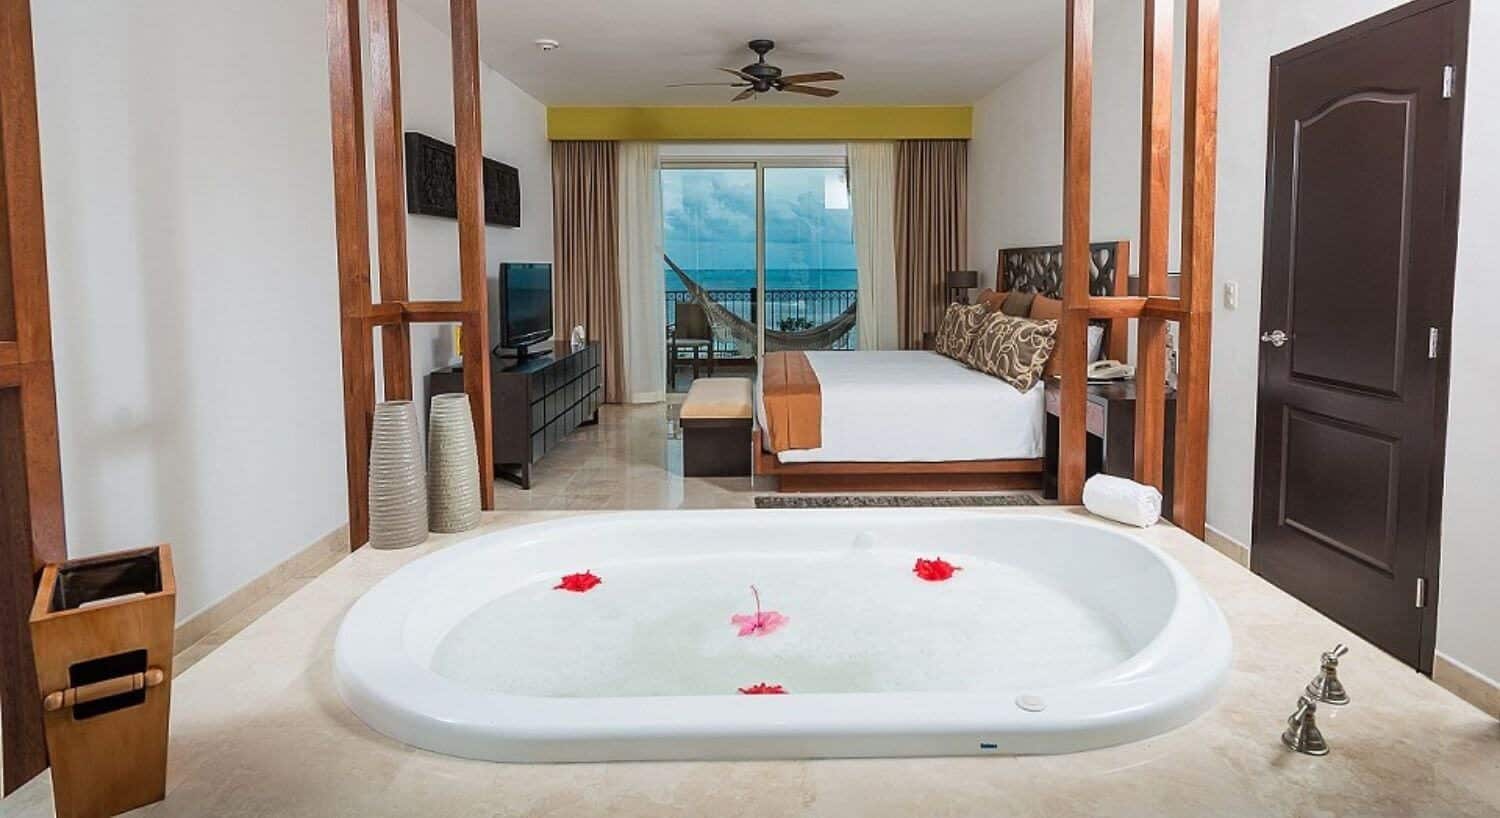 A bedroom with a king bed with white and tan bedding, nightstands and lamps on either side, a plush armchair and lamp in a corner, a jetted tub in the foreground, and sliding glass doors leading out to a balcony with hammock and ocean views.